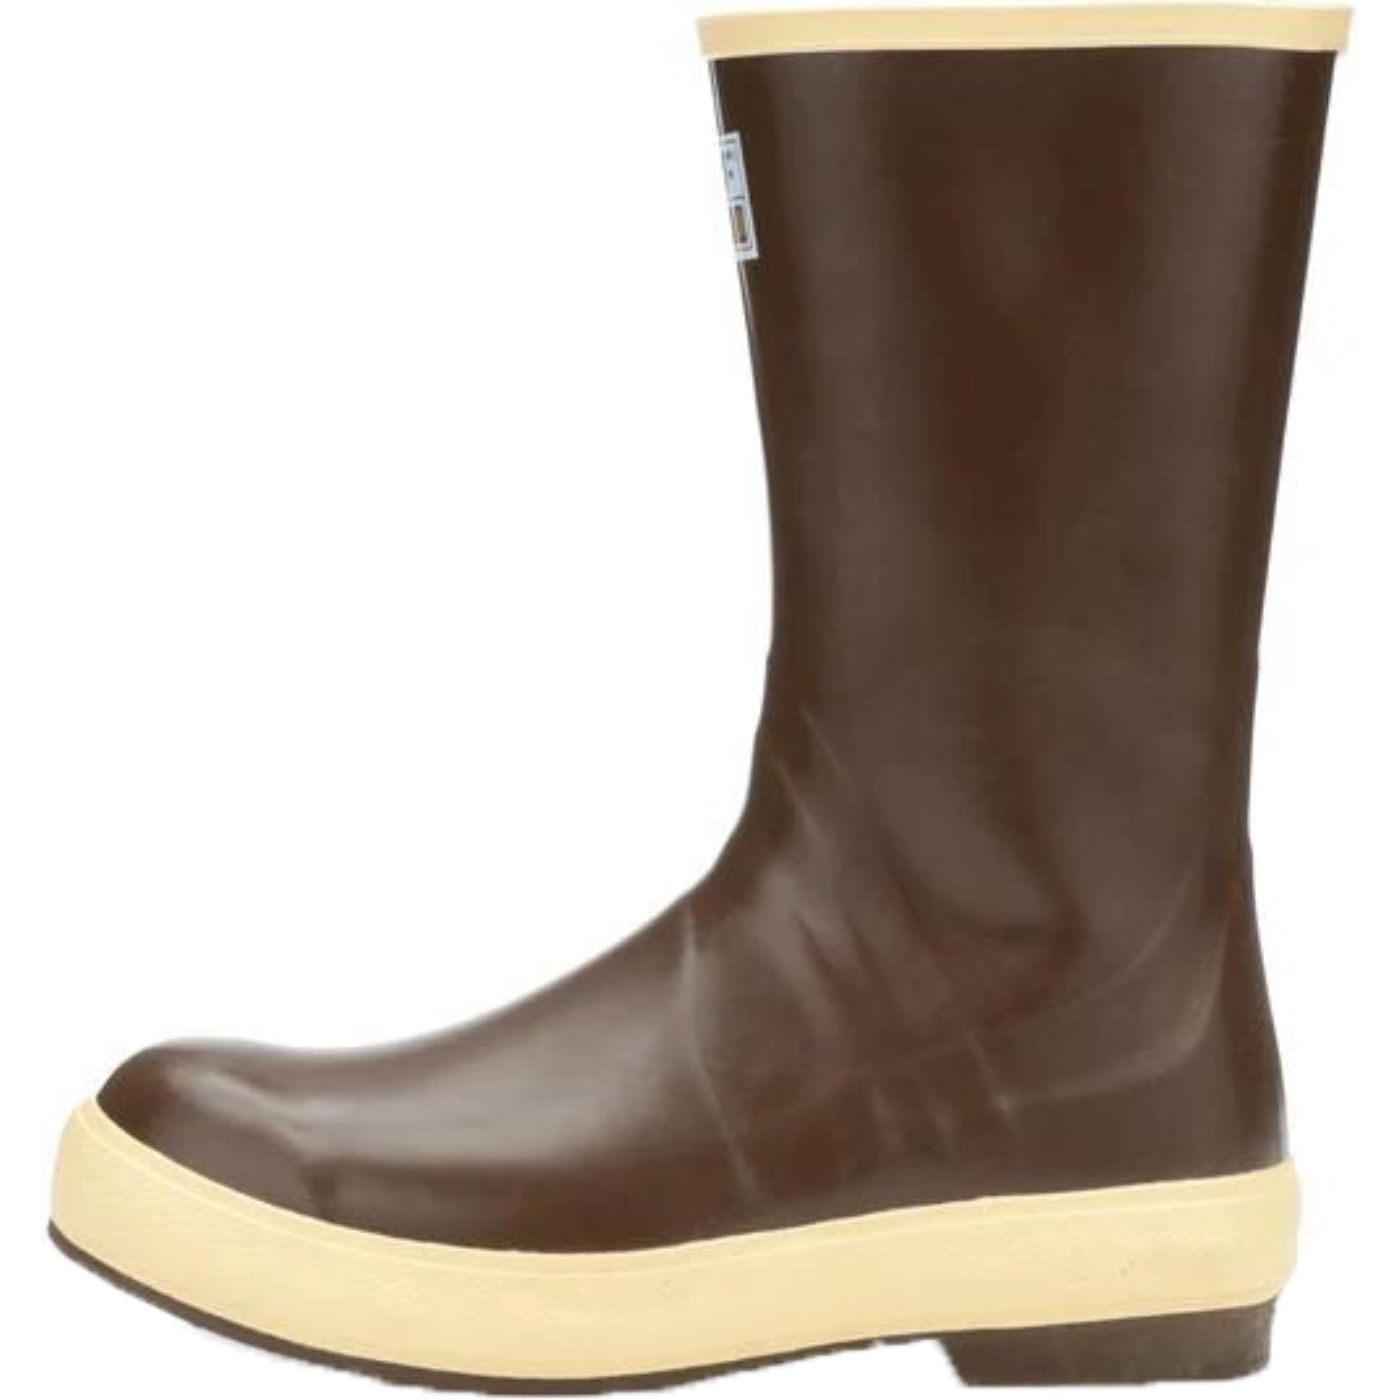 Men's 12 in Legacy Boot Size 10(M) - image 5 of 7